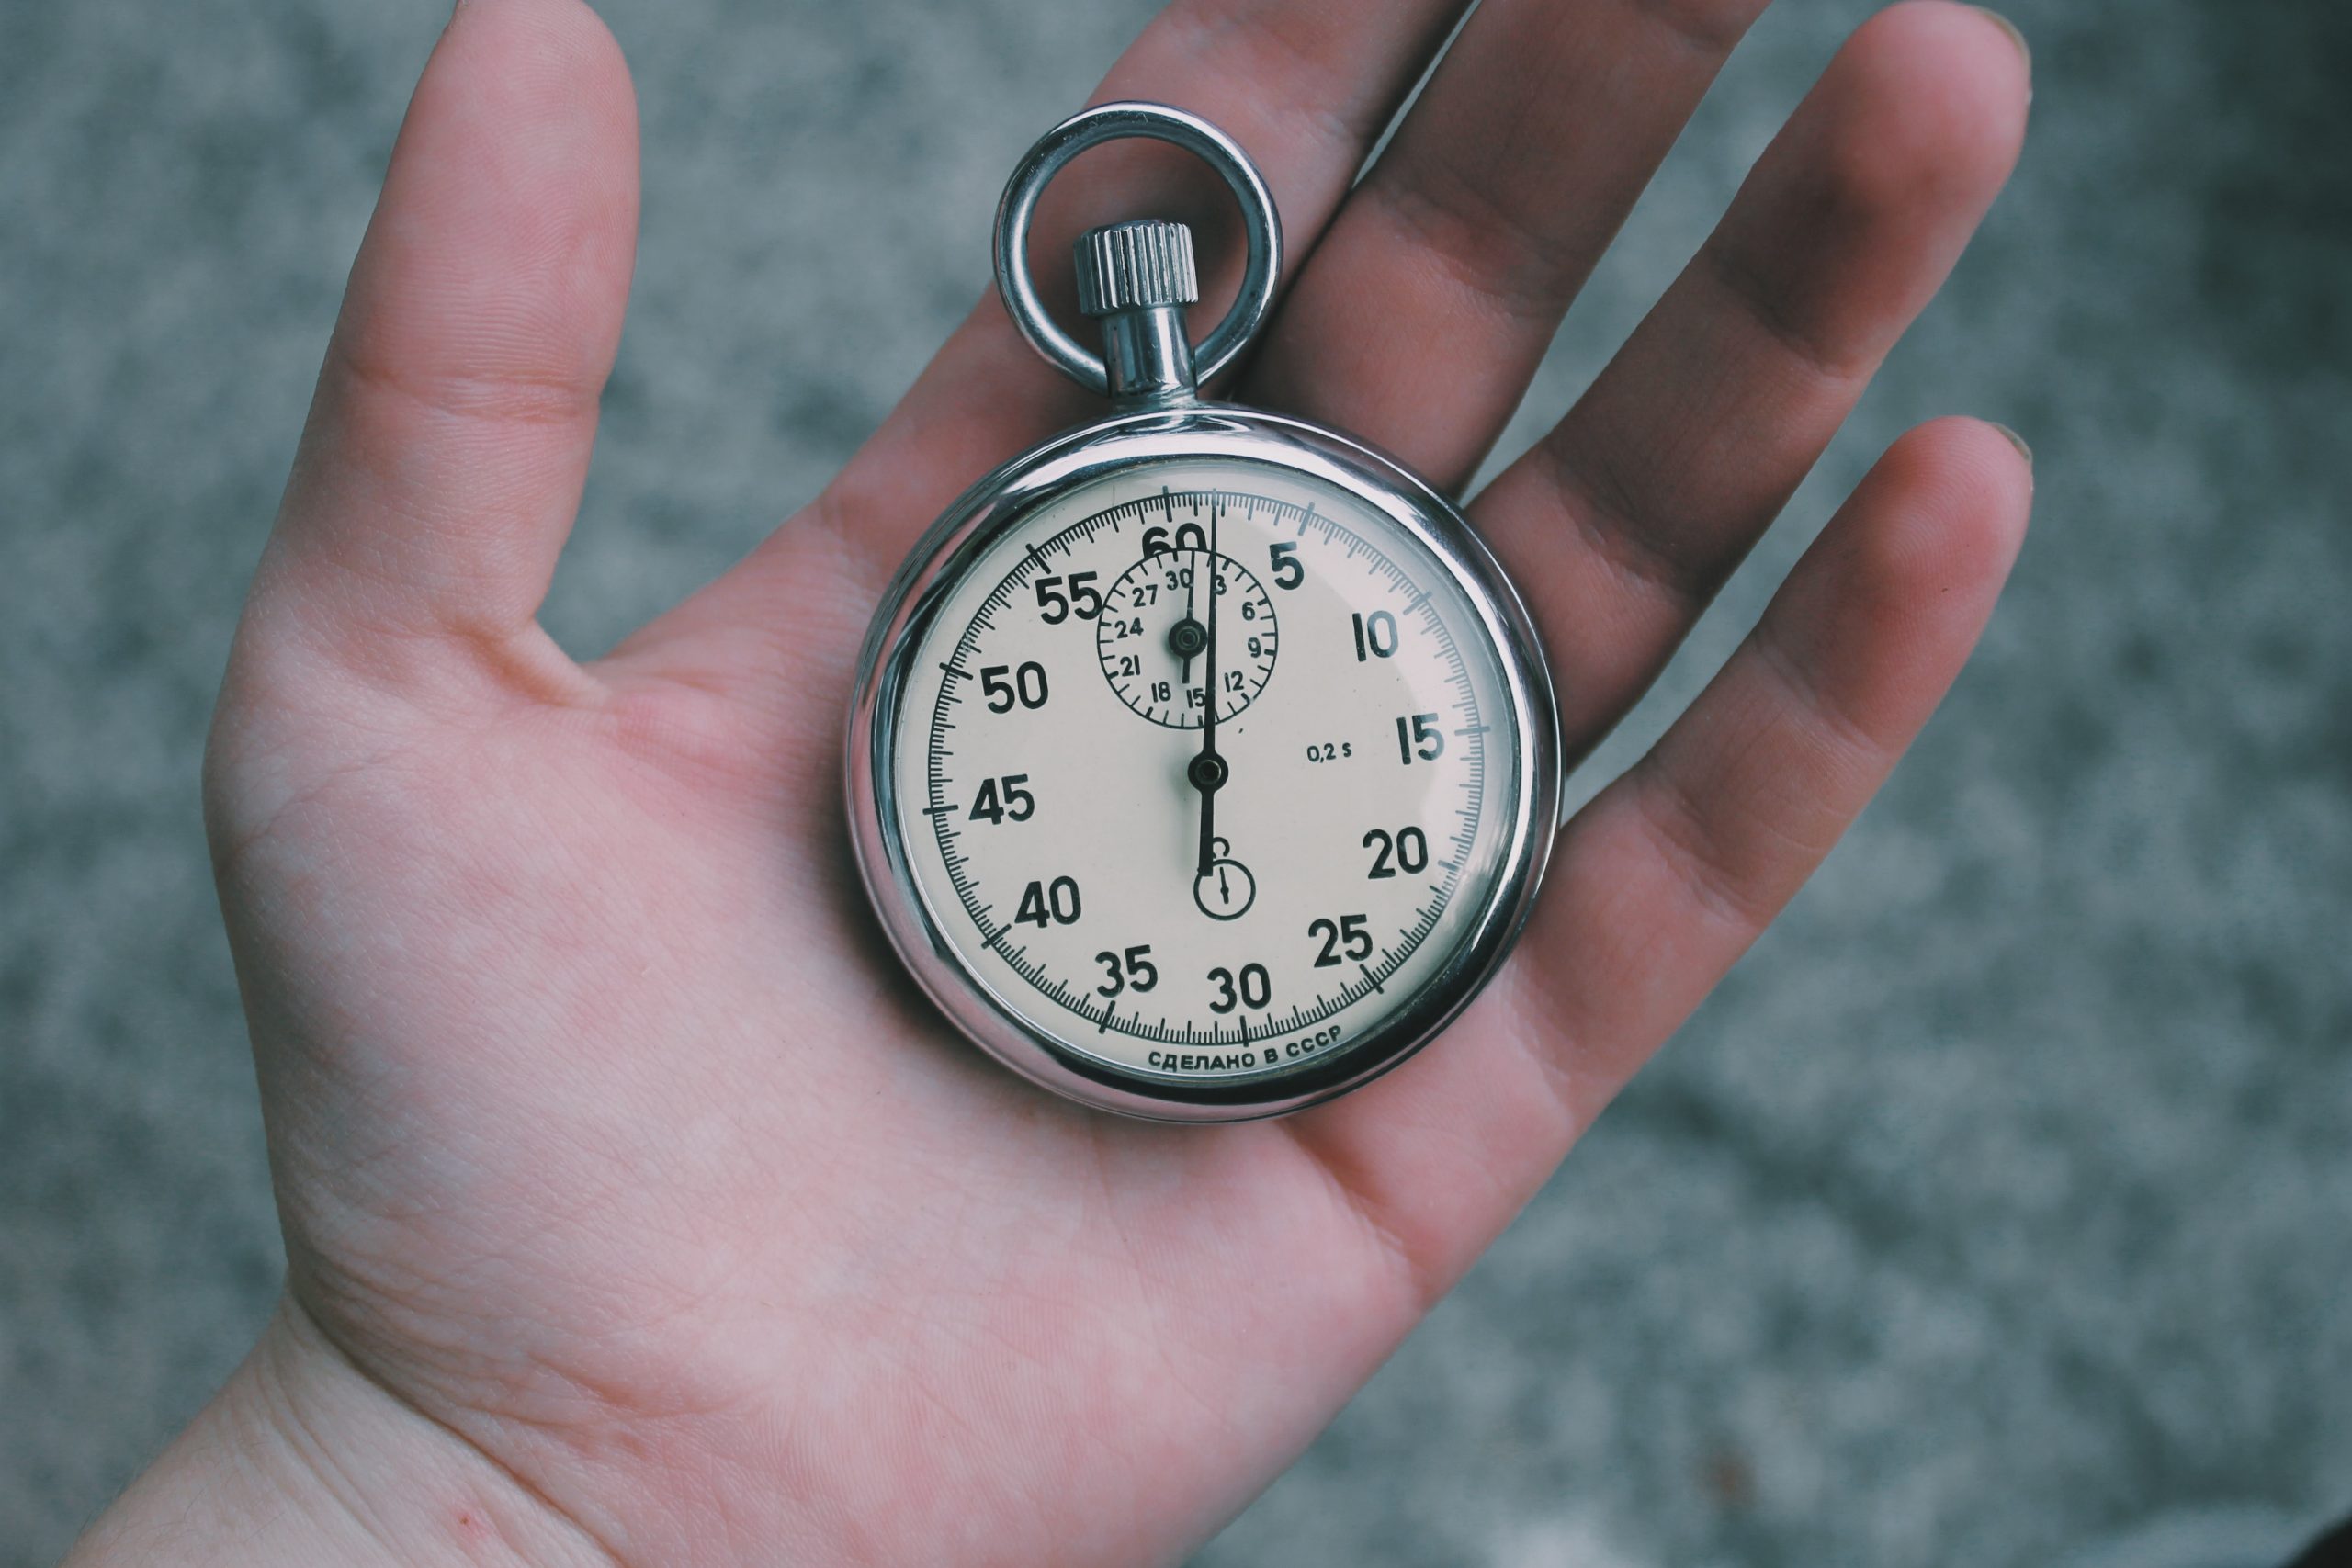 A pocket watch in the palm of someone's hand